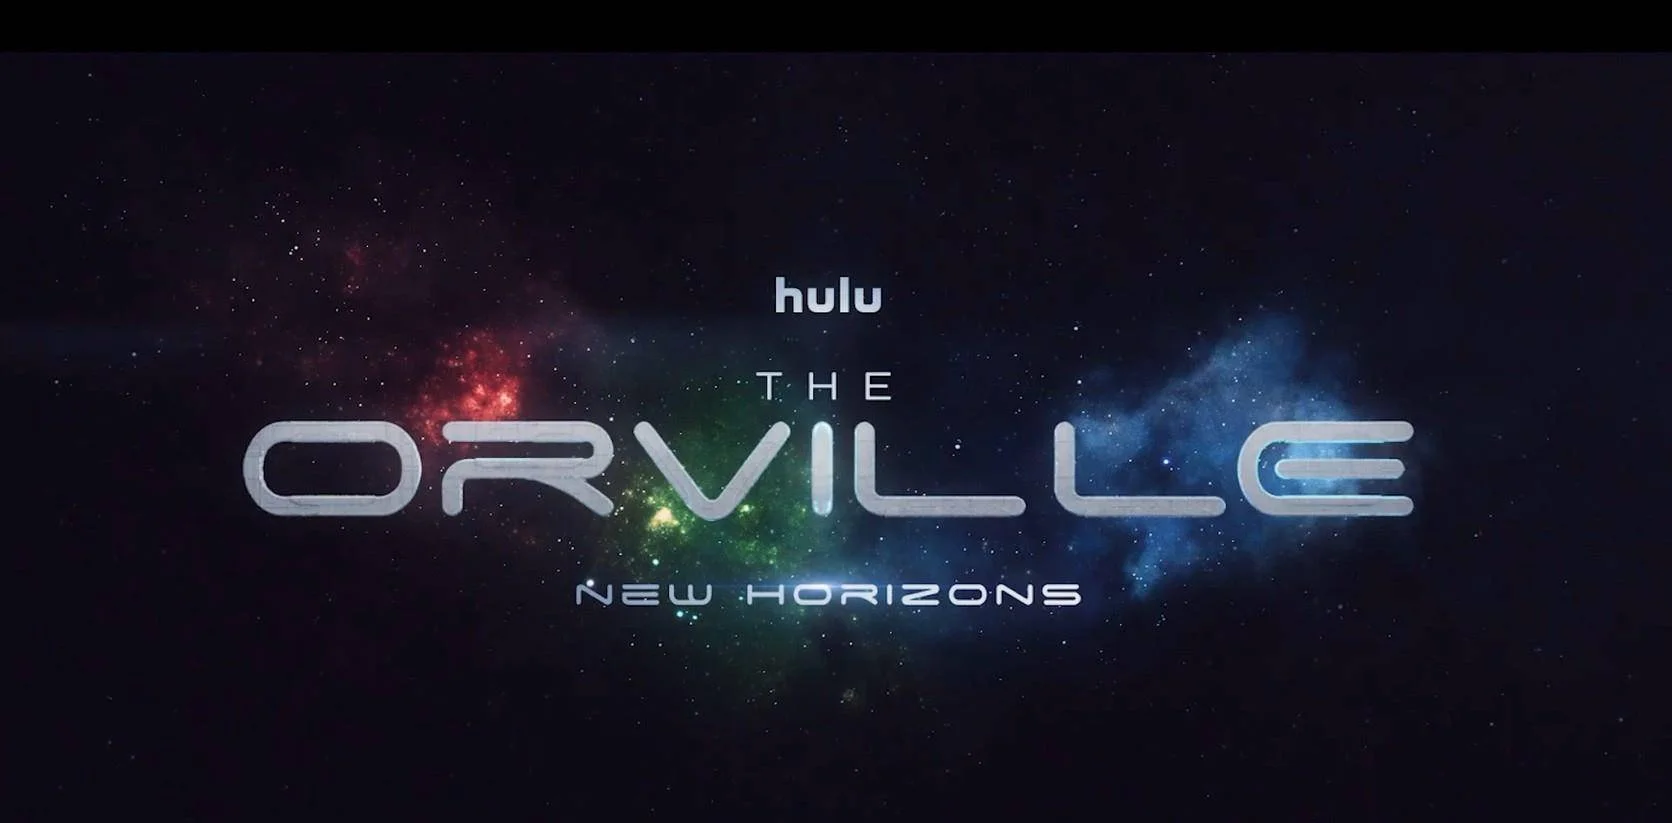 Trailer for "The Orville: New Horizons", which will be available on June 2